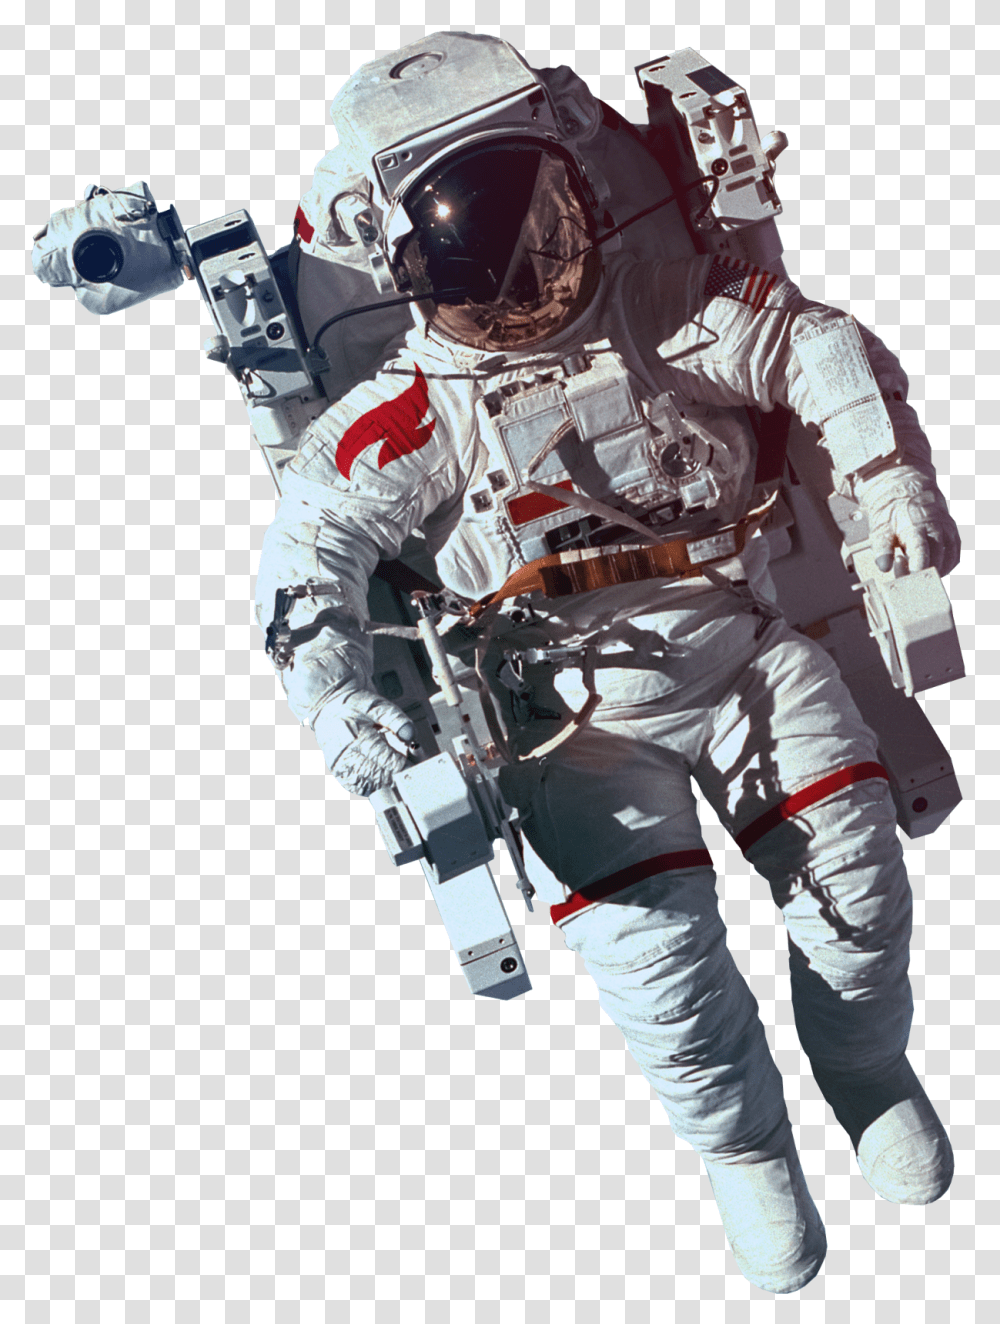 Download Astronaut Image For Free Astronaut, Person, Human, Helmet, Clothing Transparent Png